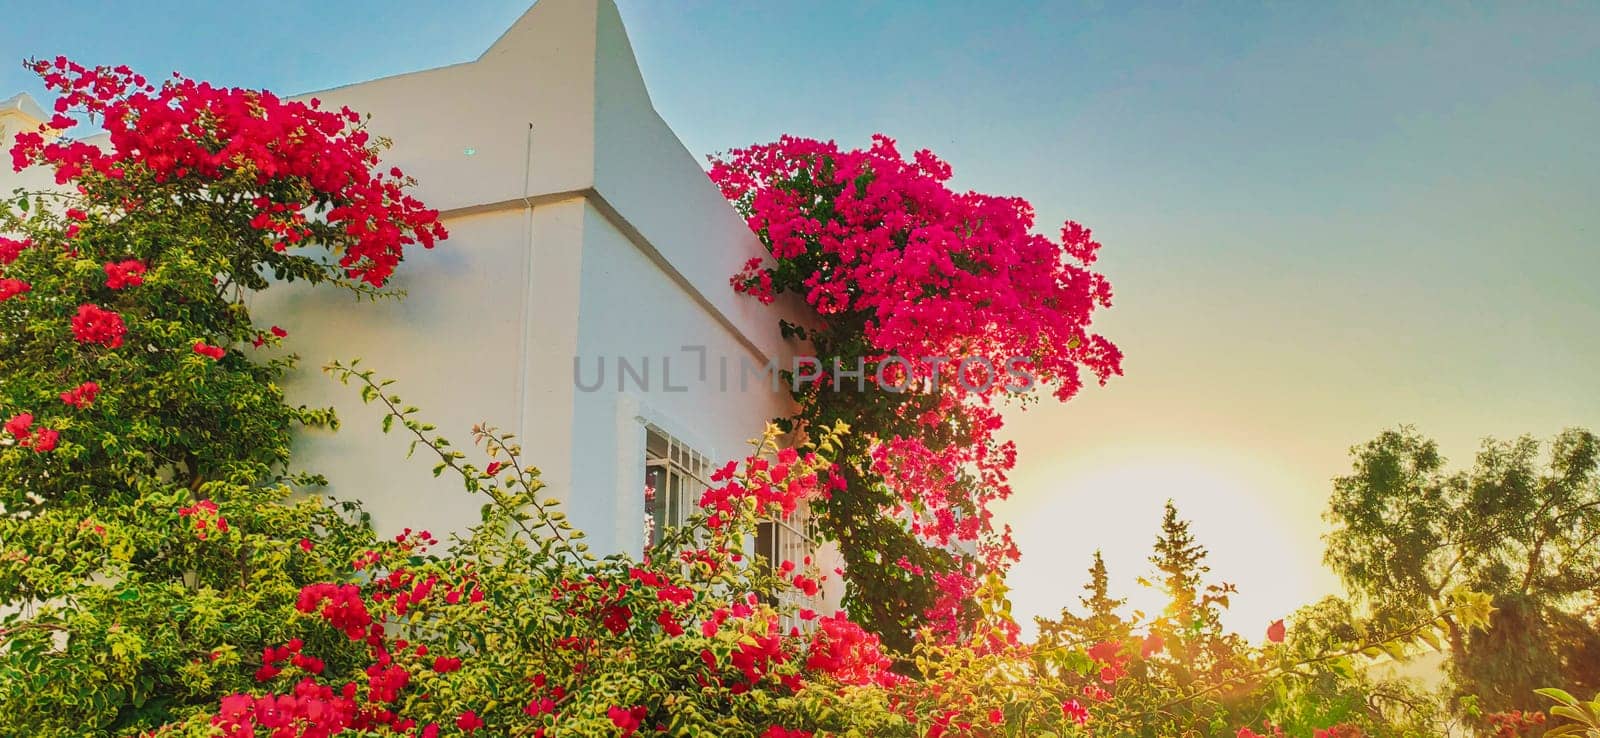 Charming Mediterranean house with beautiful bougainvillea. Old buildings with flowers and plants as decoration on the wall download photo